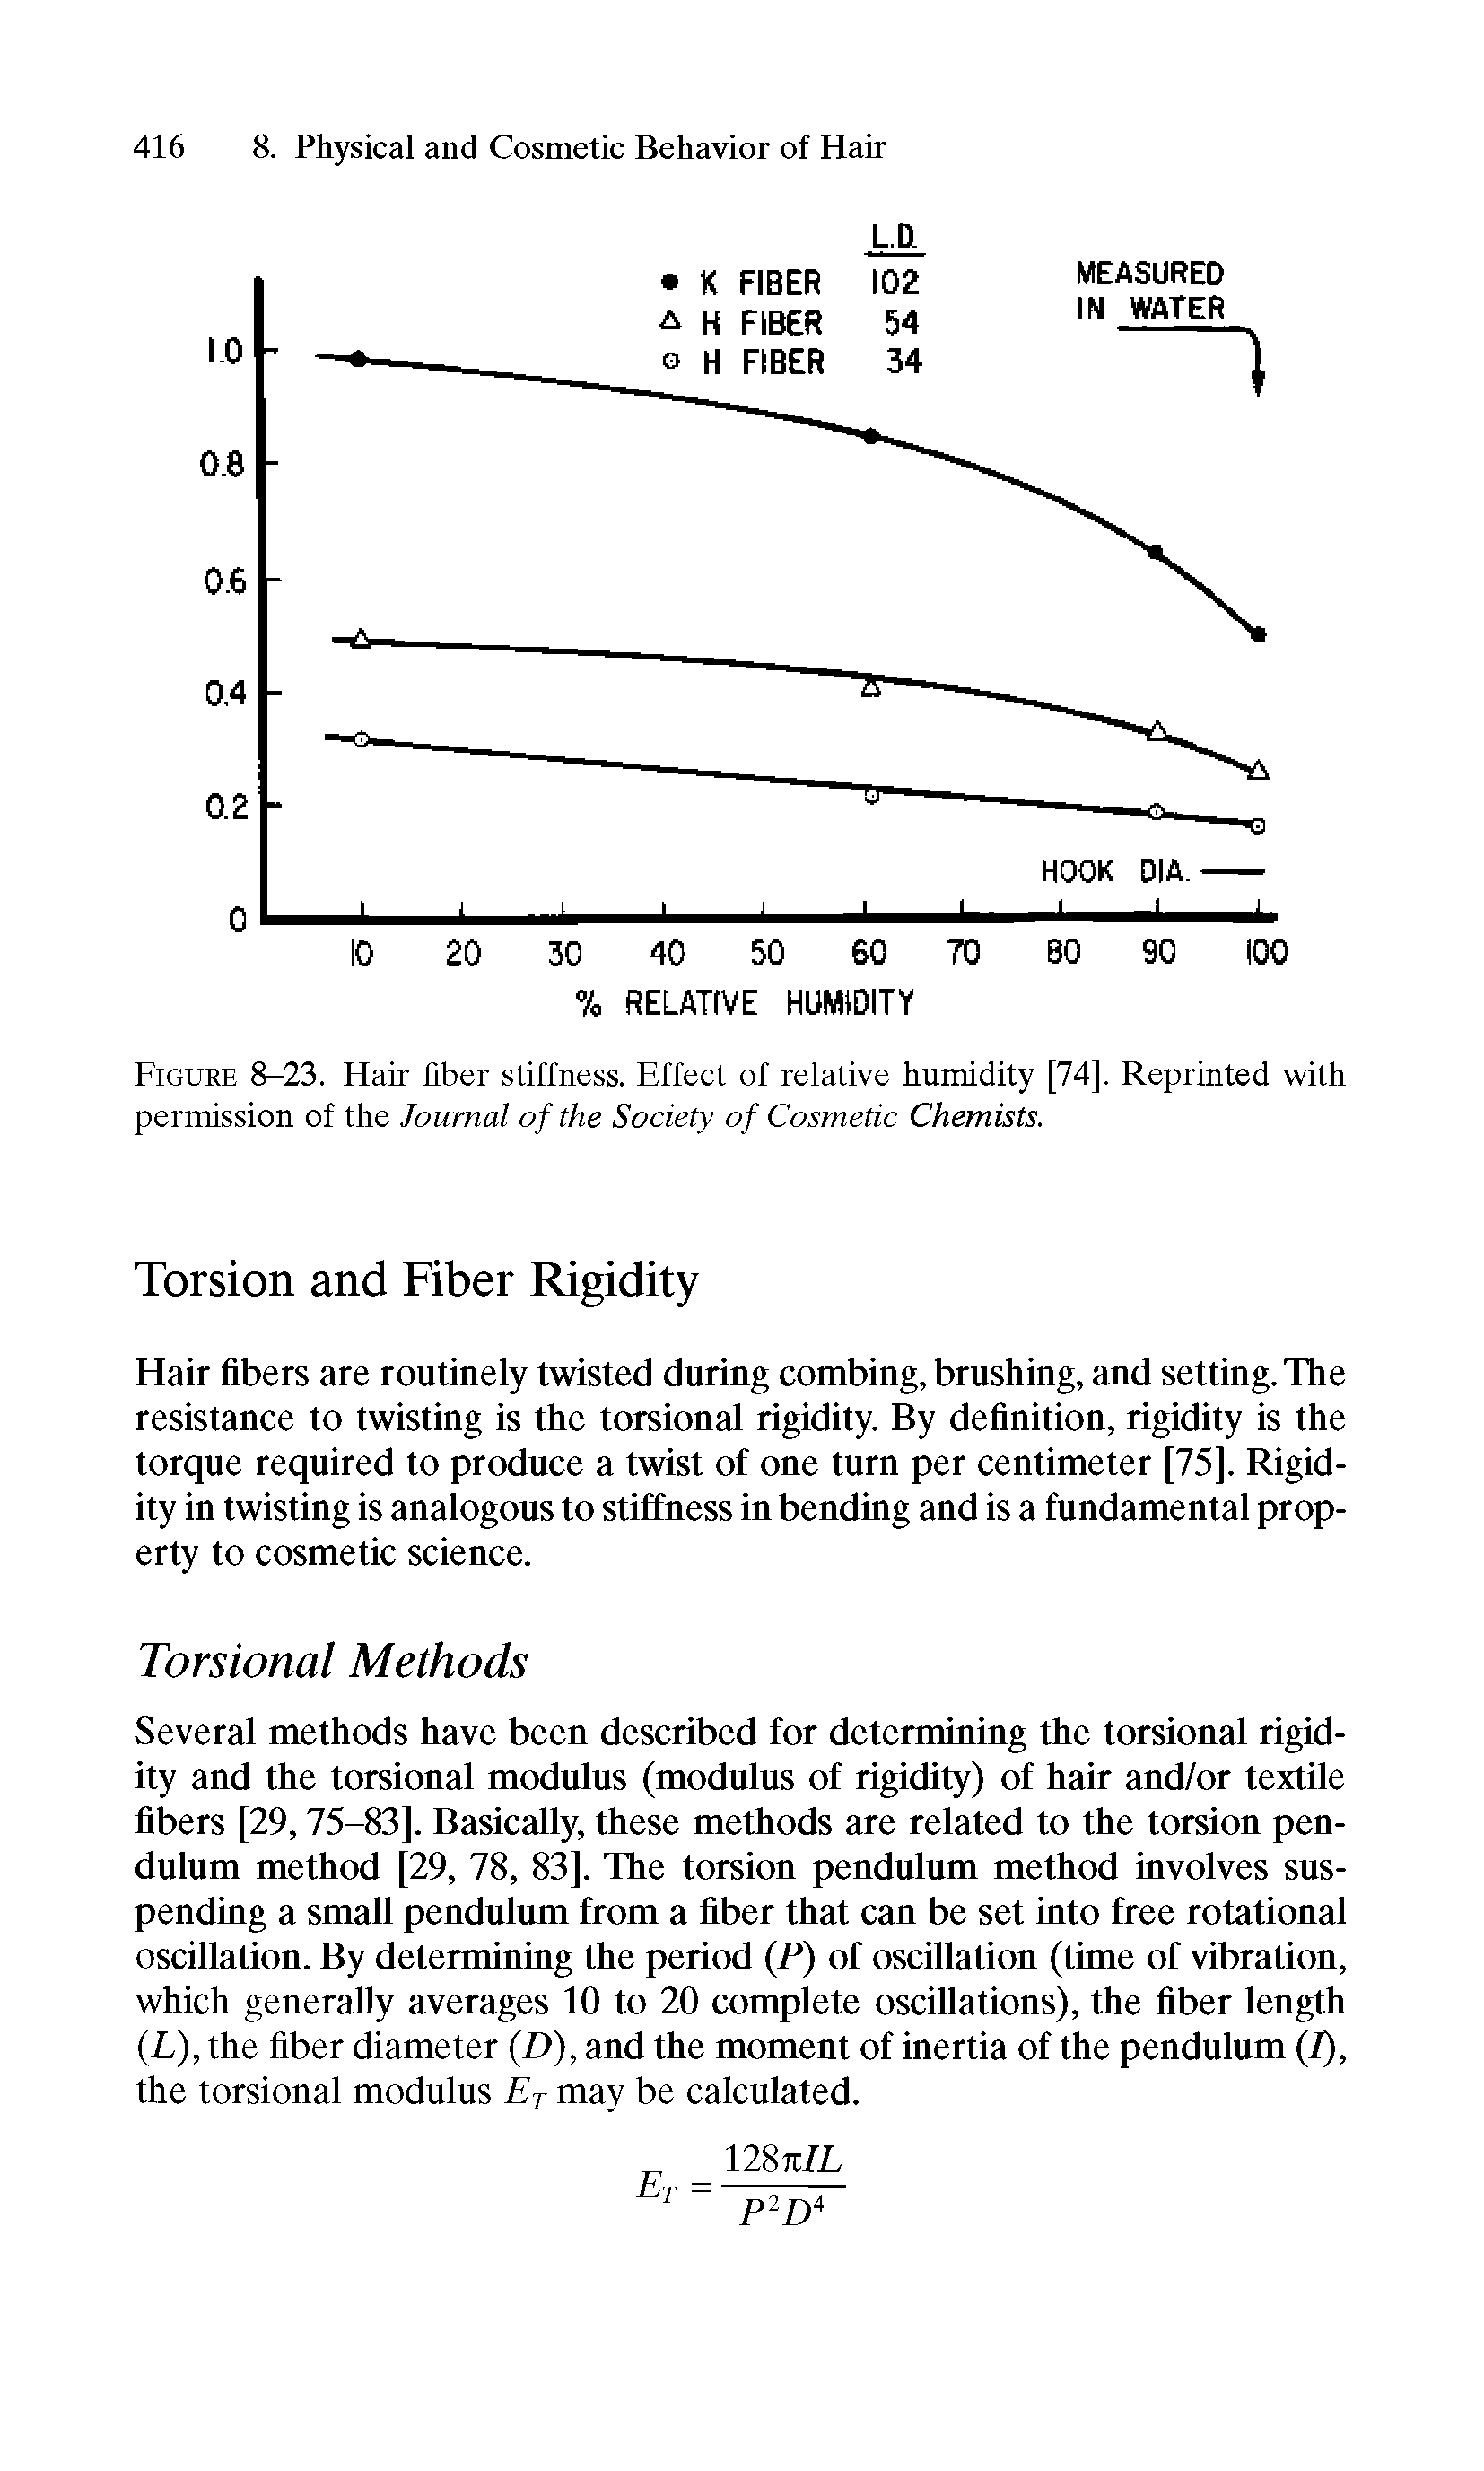 Figure 8-23. Hair fiber stiffness. Effect of relative humidity [74]. Reprinted with permission of the Journal of the Society of Cosmetic Chemists.